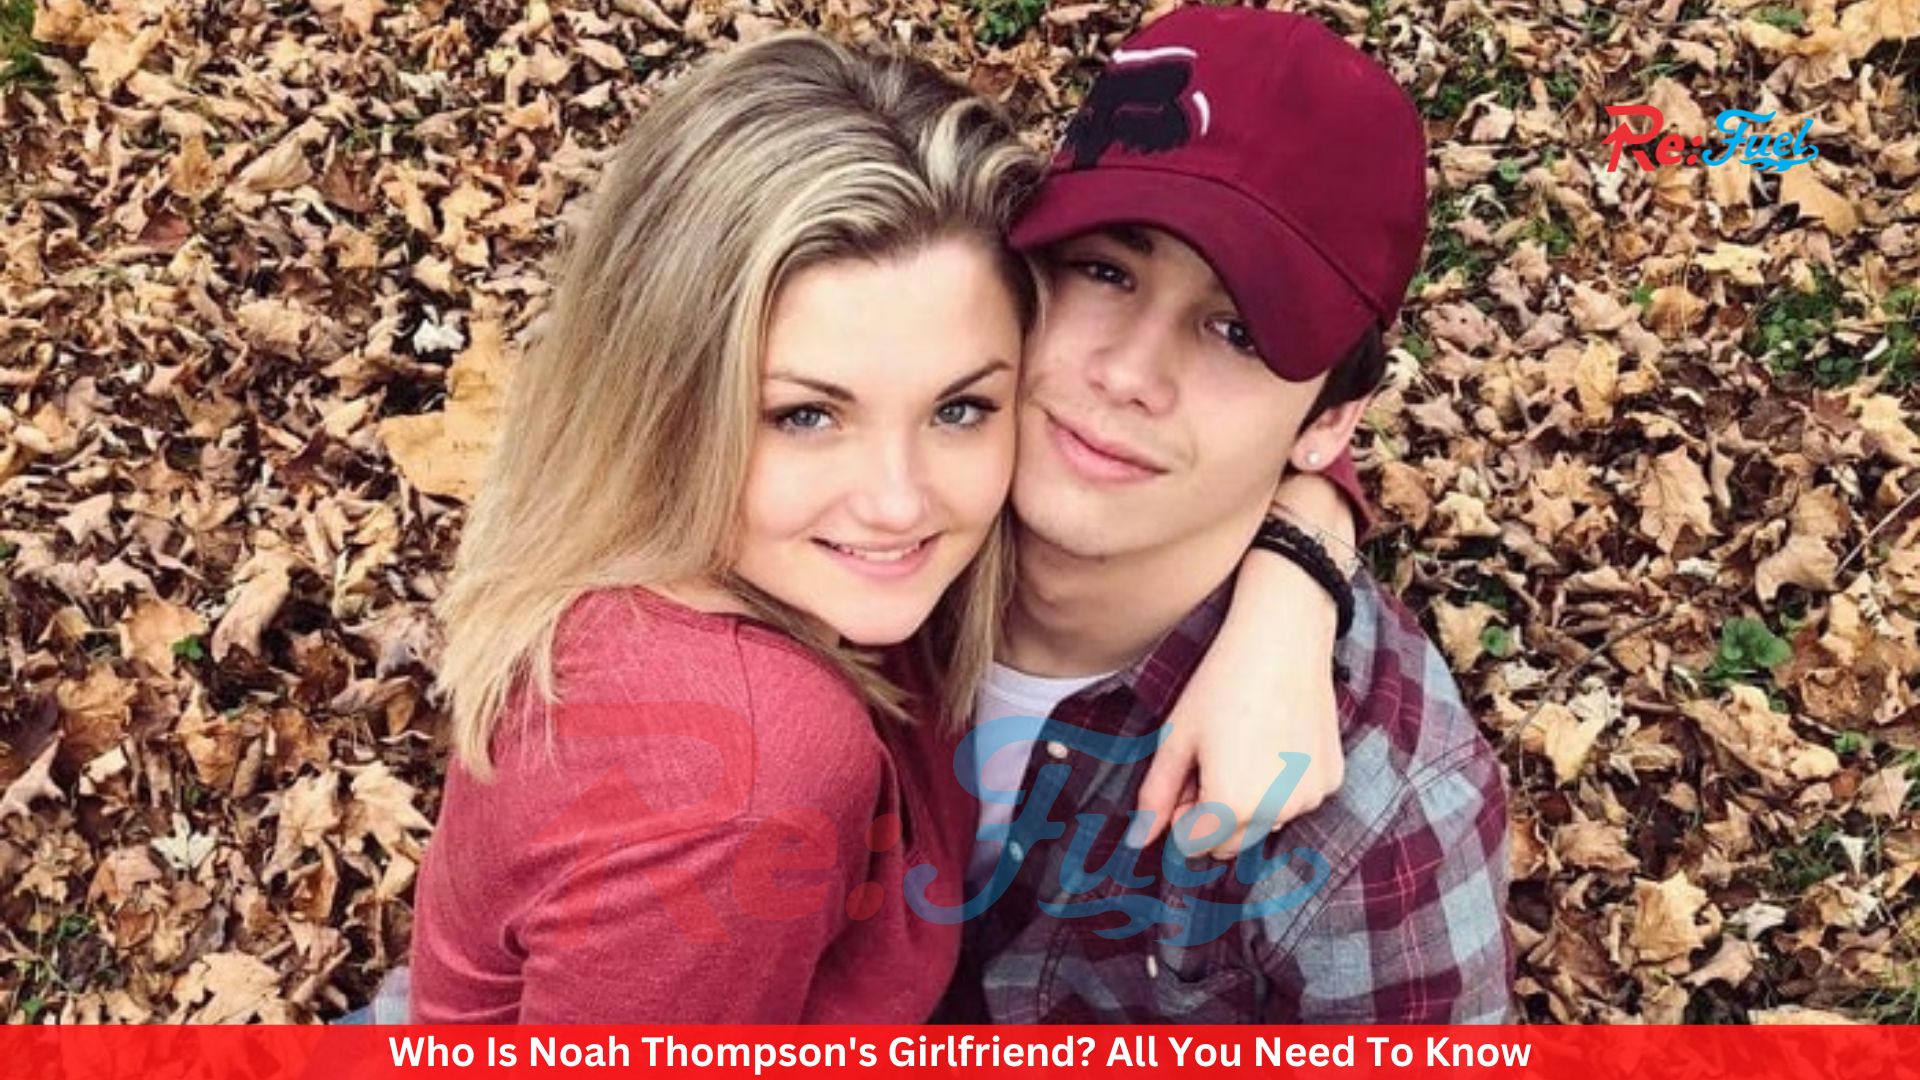 Who Is Noah Thompson's Girlfriend? All You Need To Know